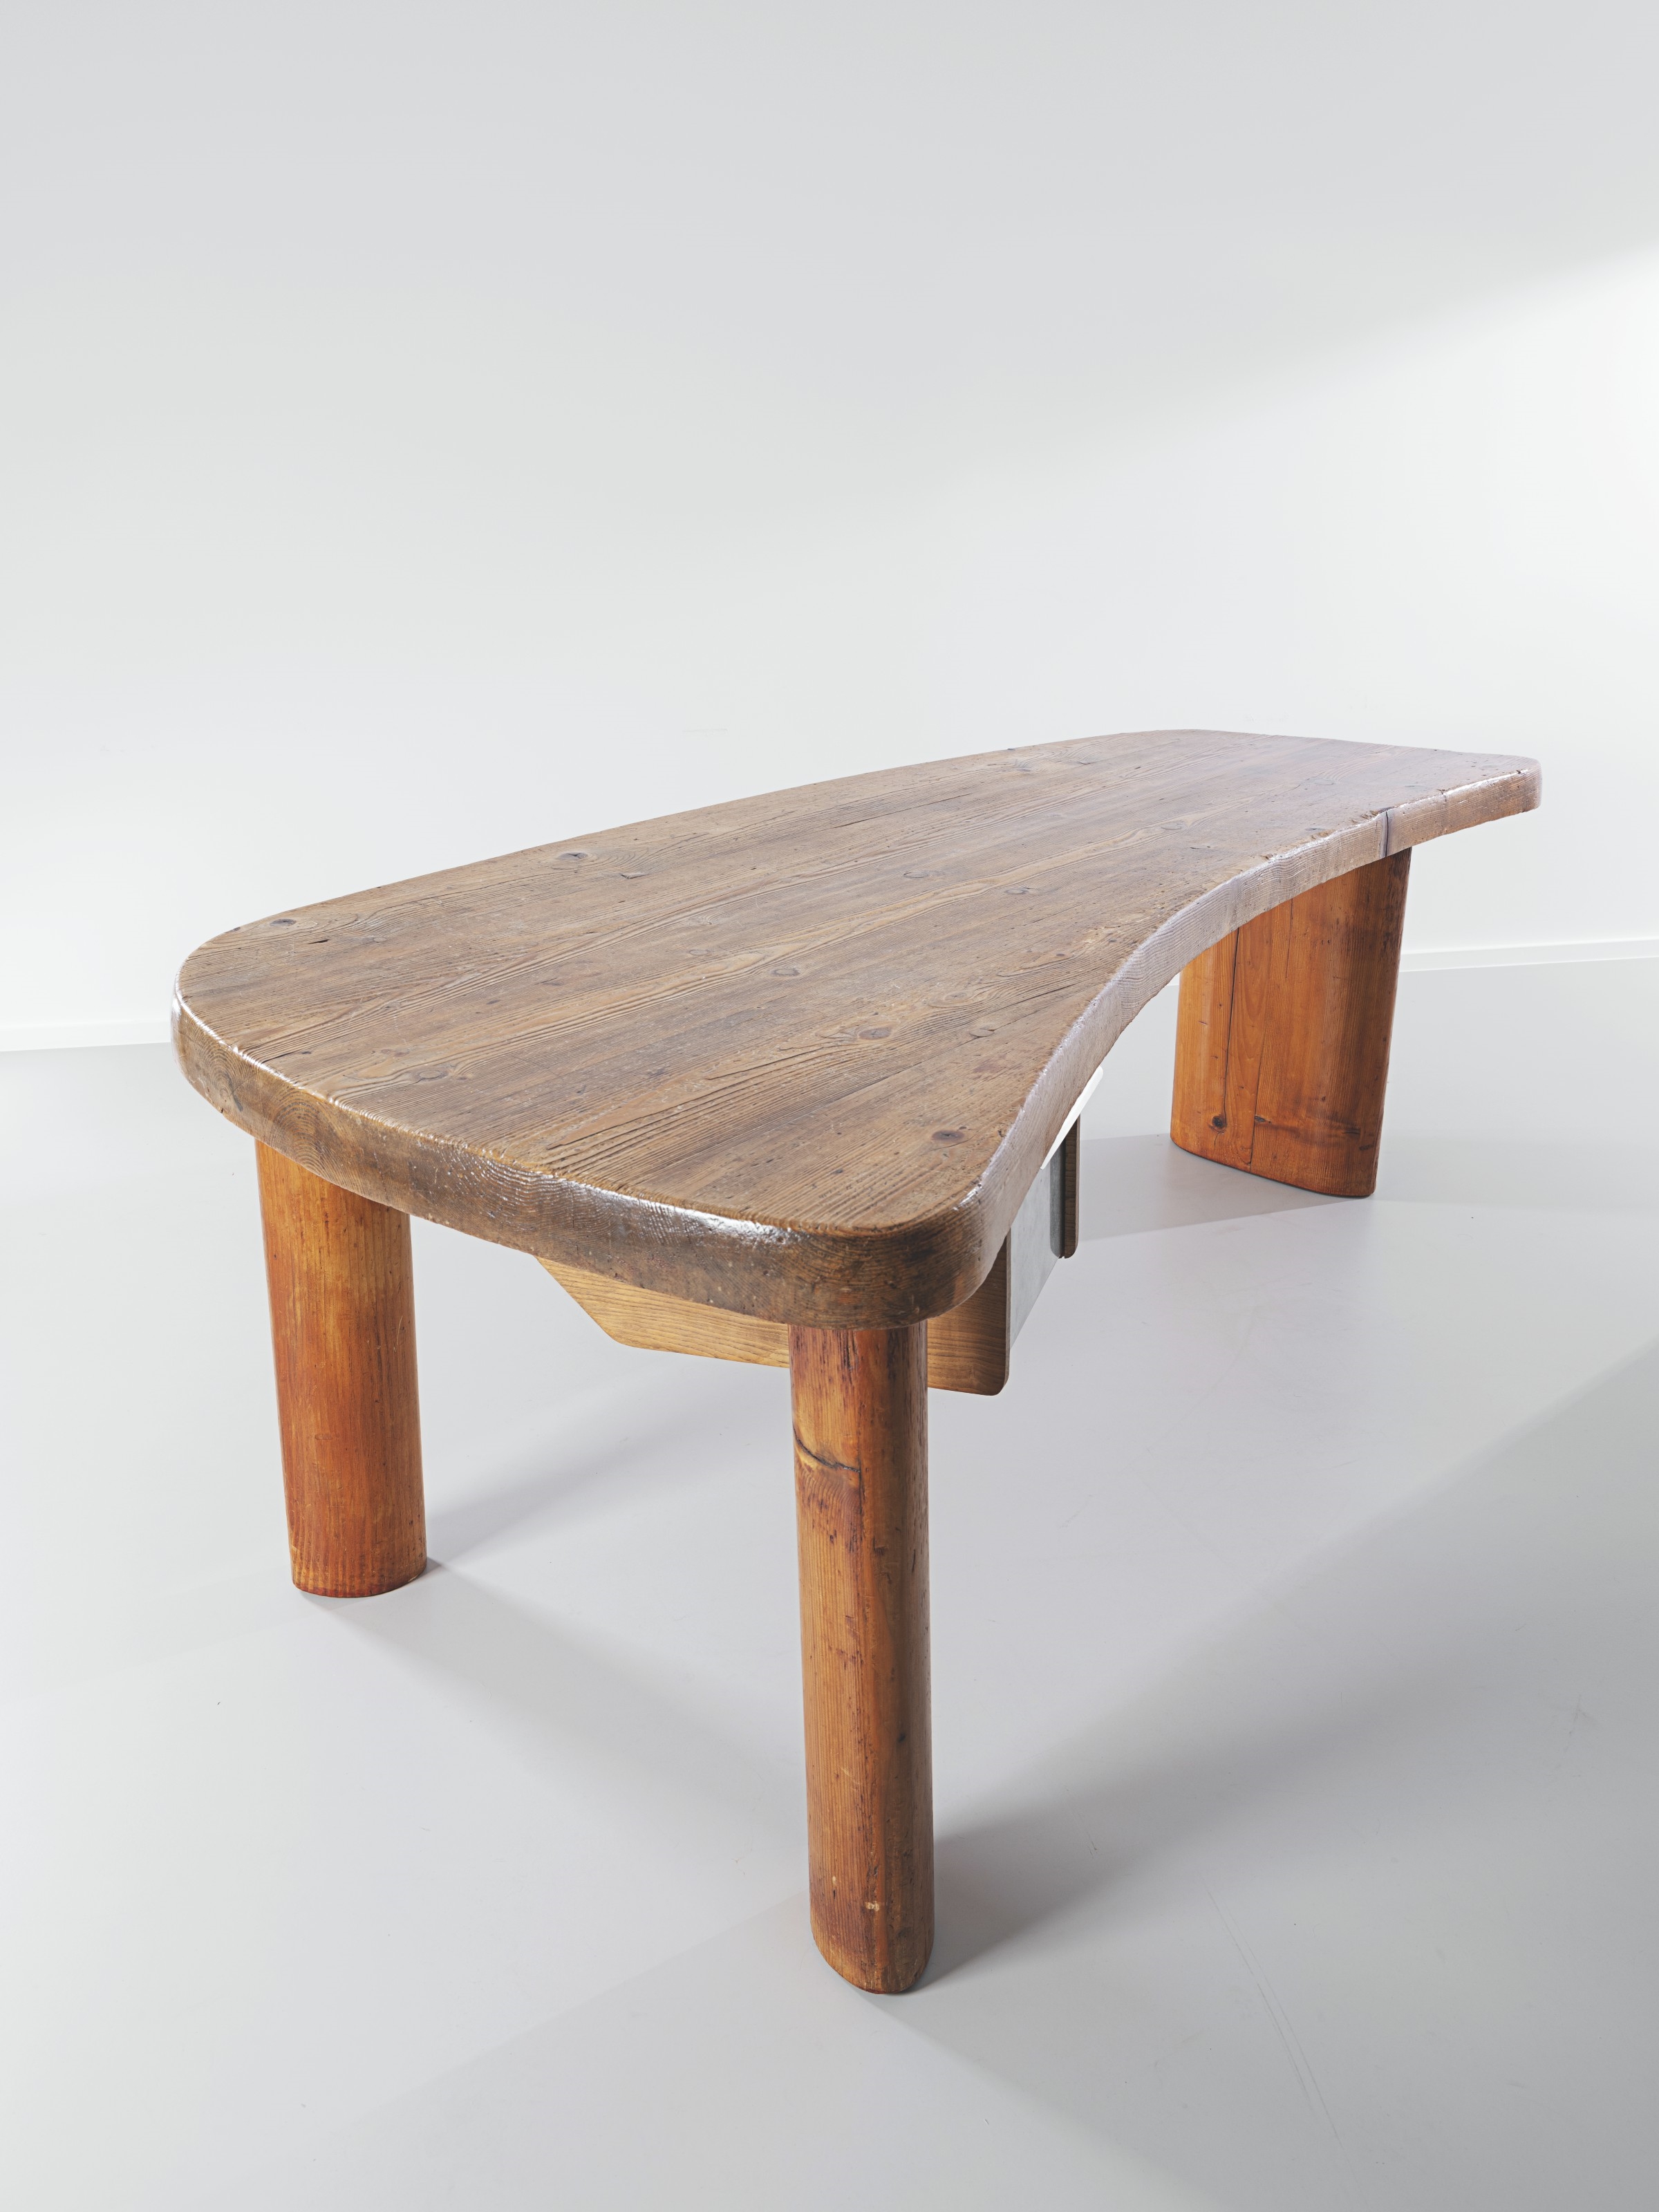 Forme Libre” Desk, cherry wood, circa 1962, Charlotte Perriand, Galerie  Arcanes